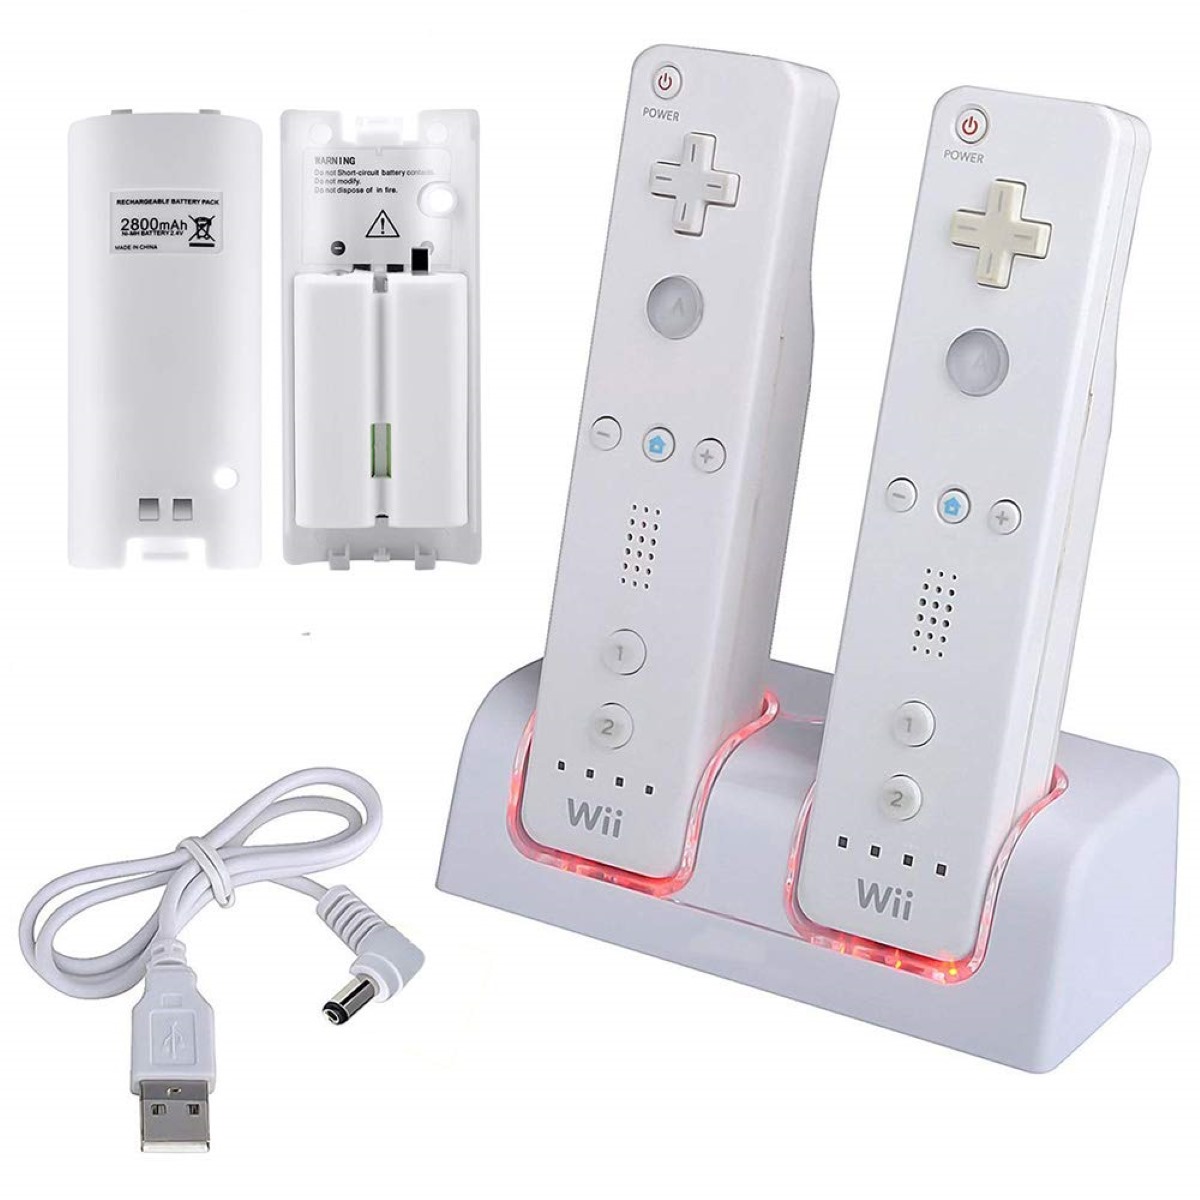 Rechargeable Wii Remote Batteries, TechKen Charging Station with 4 Pack  2800mAh Wii Rechargeable Battery Pack for Wii Controller, Wii Charger